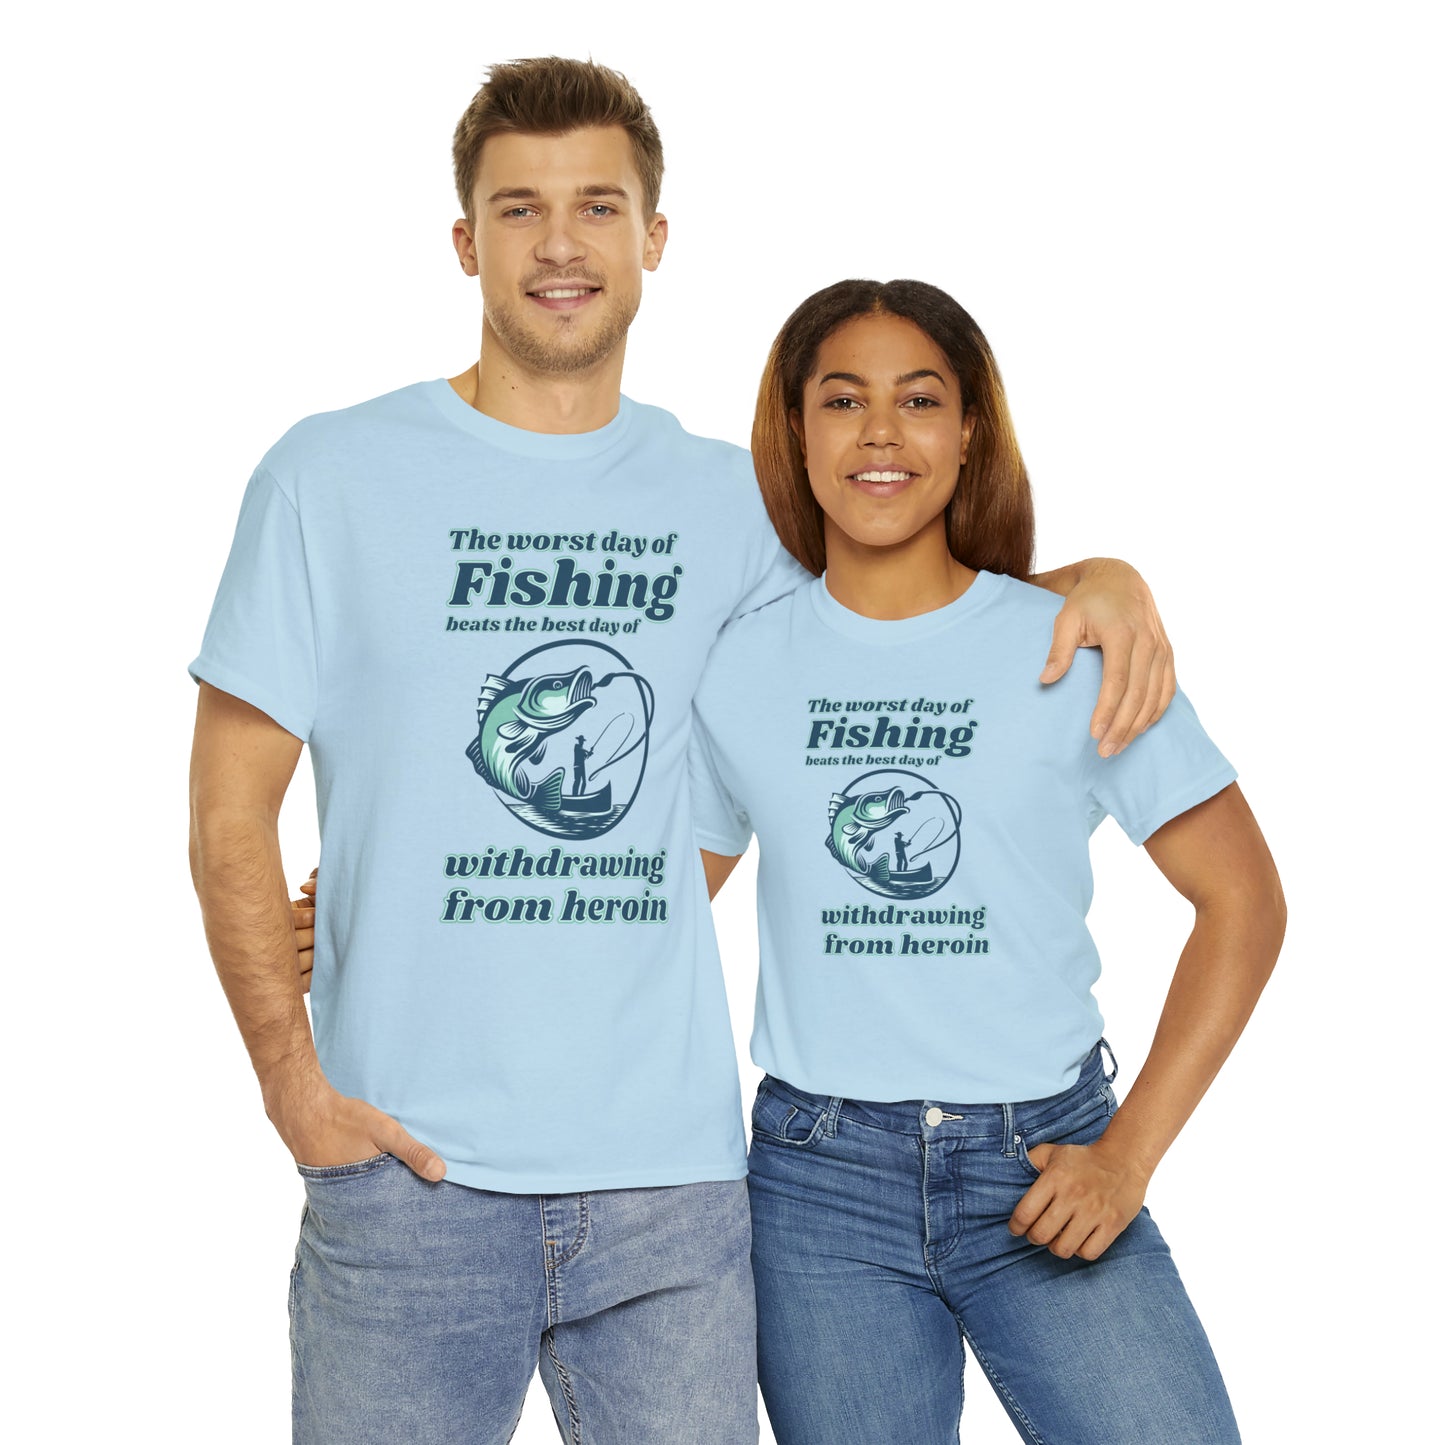 The worst day of fishing beats the best day of withdrawing from heroin - Unisex Heavy Cotton Tee